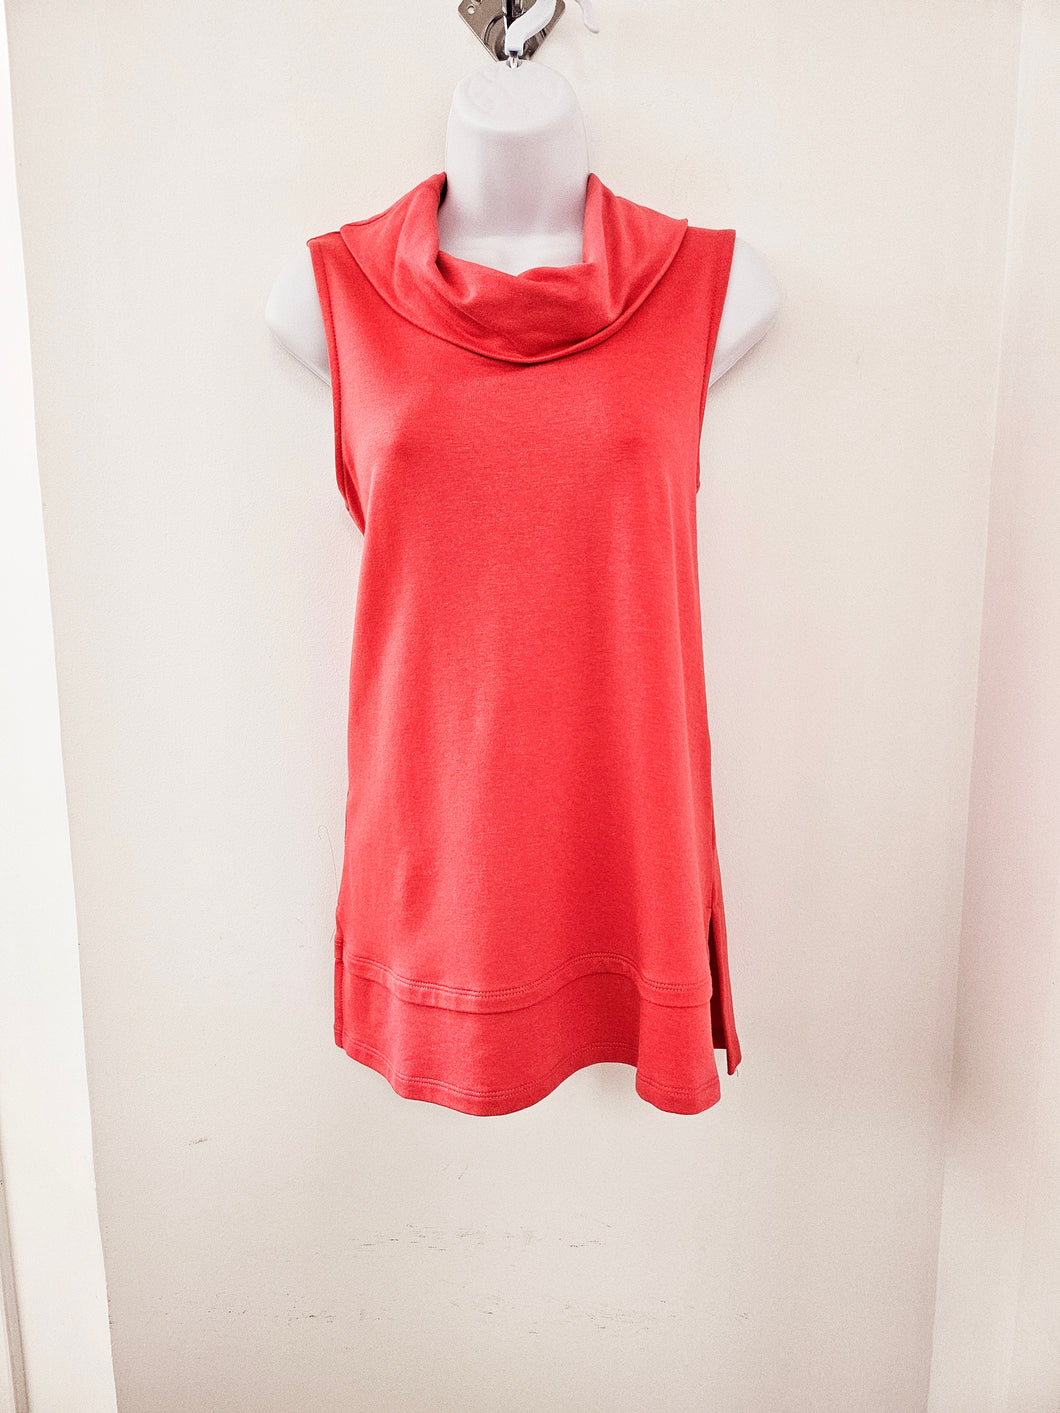 Pure - 112-4812 - Cowl Neck Sleeveless Top - Coral